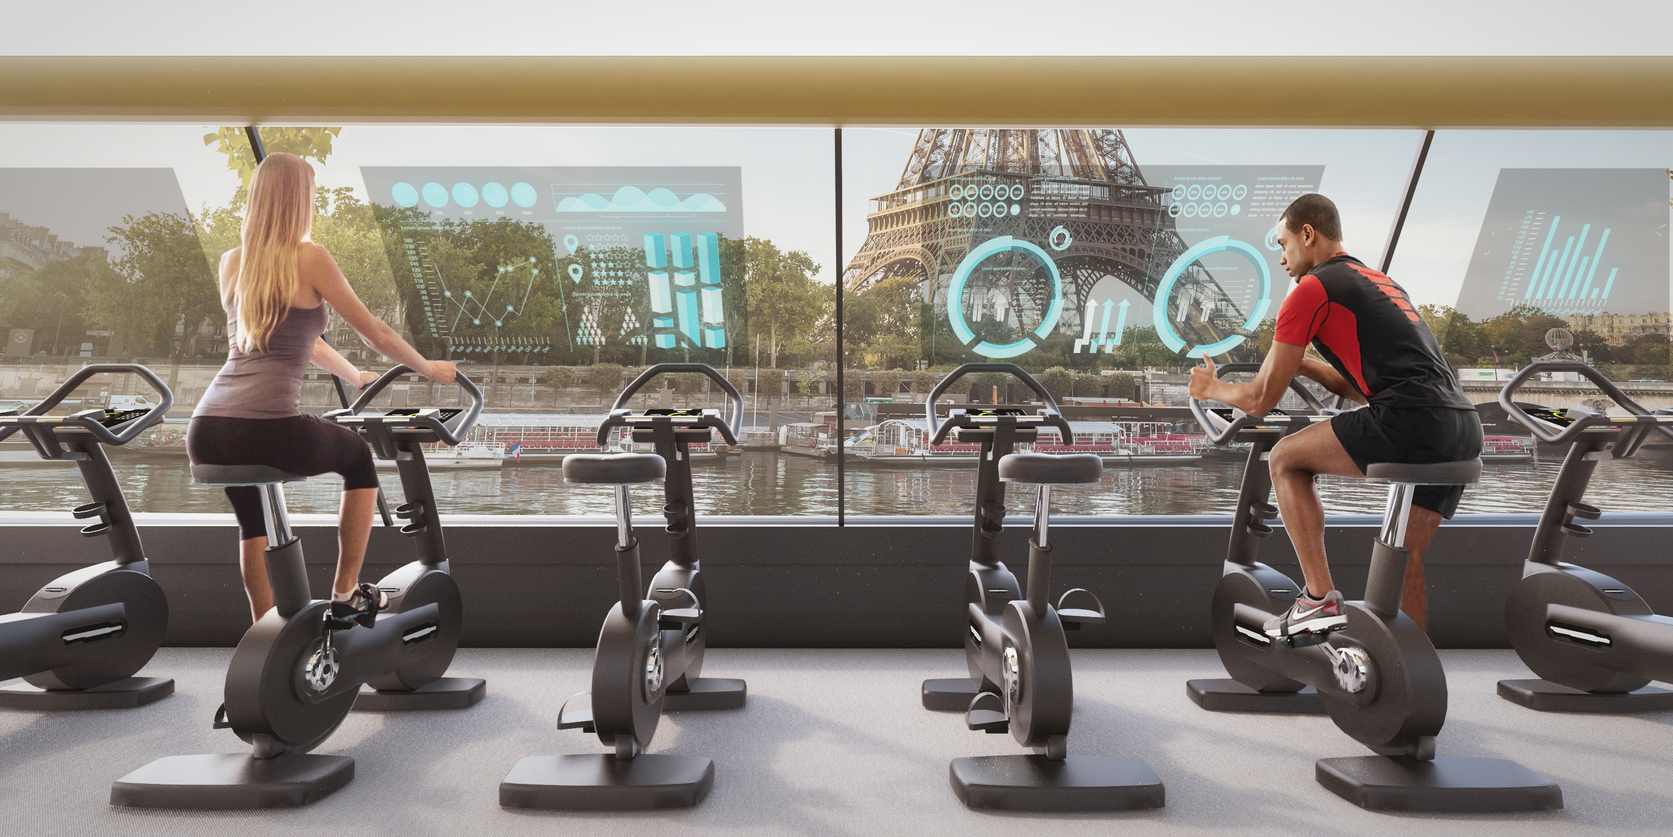 The Intelligent Gym – IoT Applied